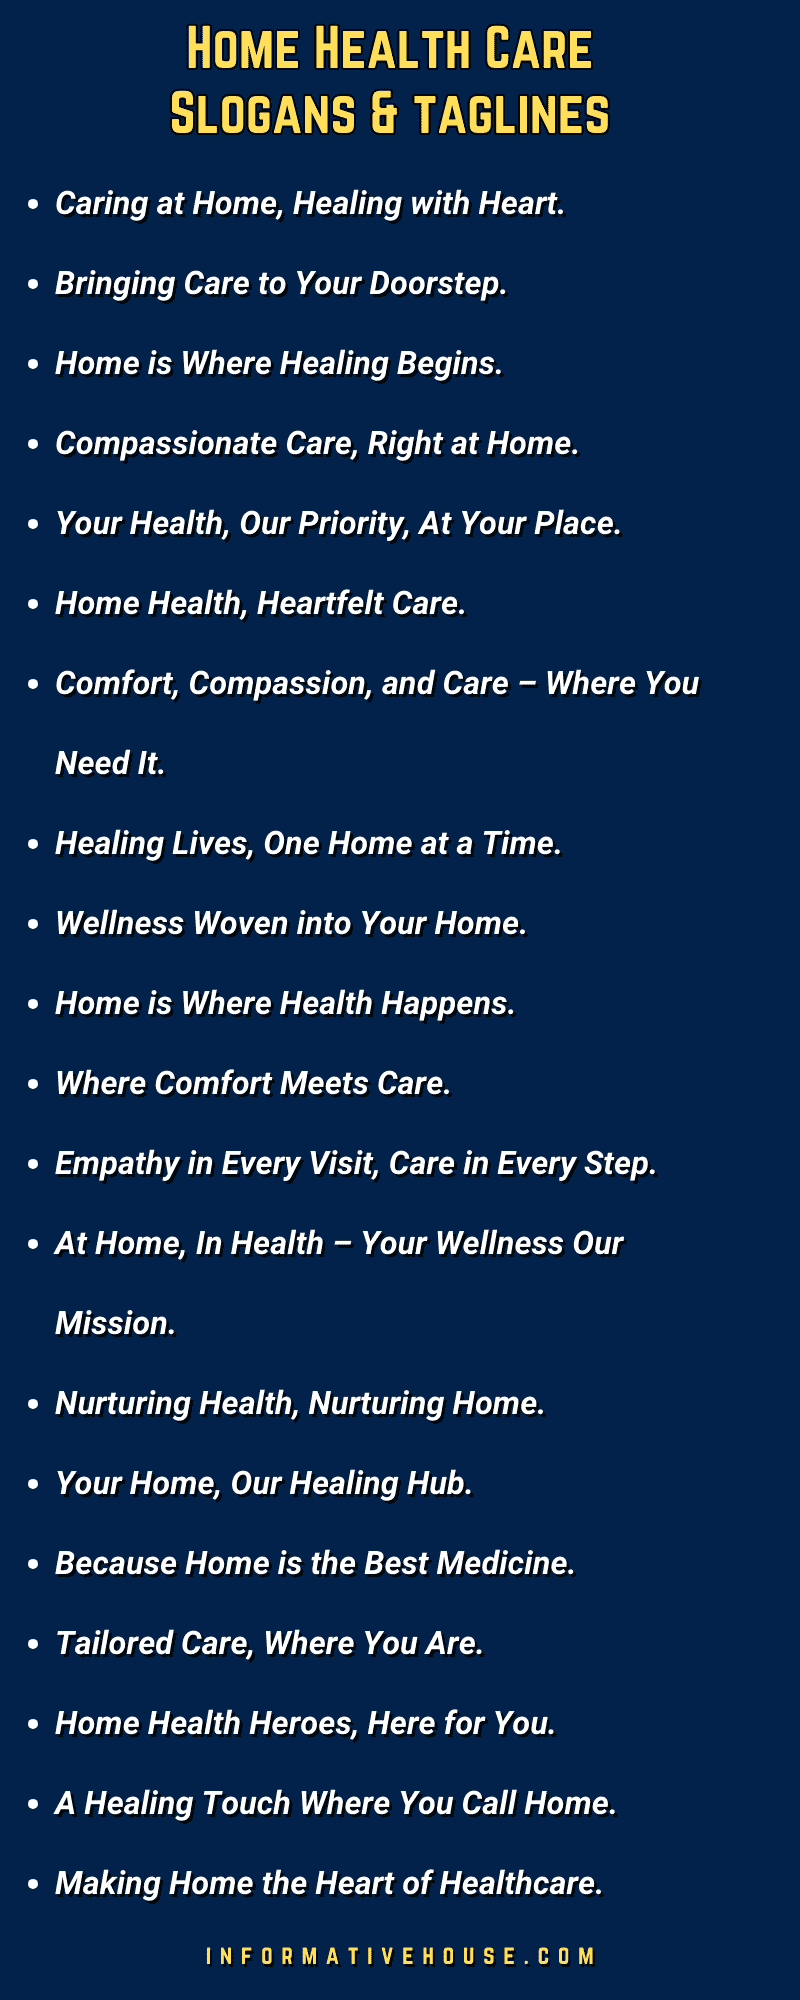 Best Home Health Care Slogans